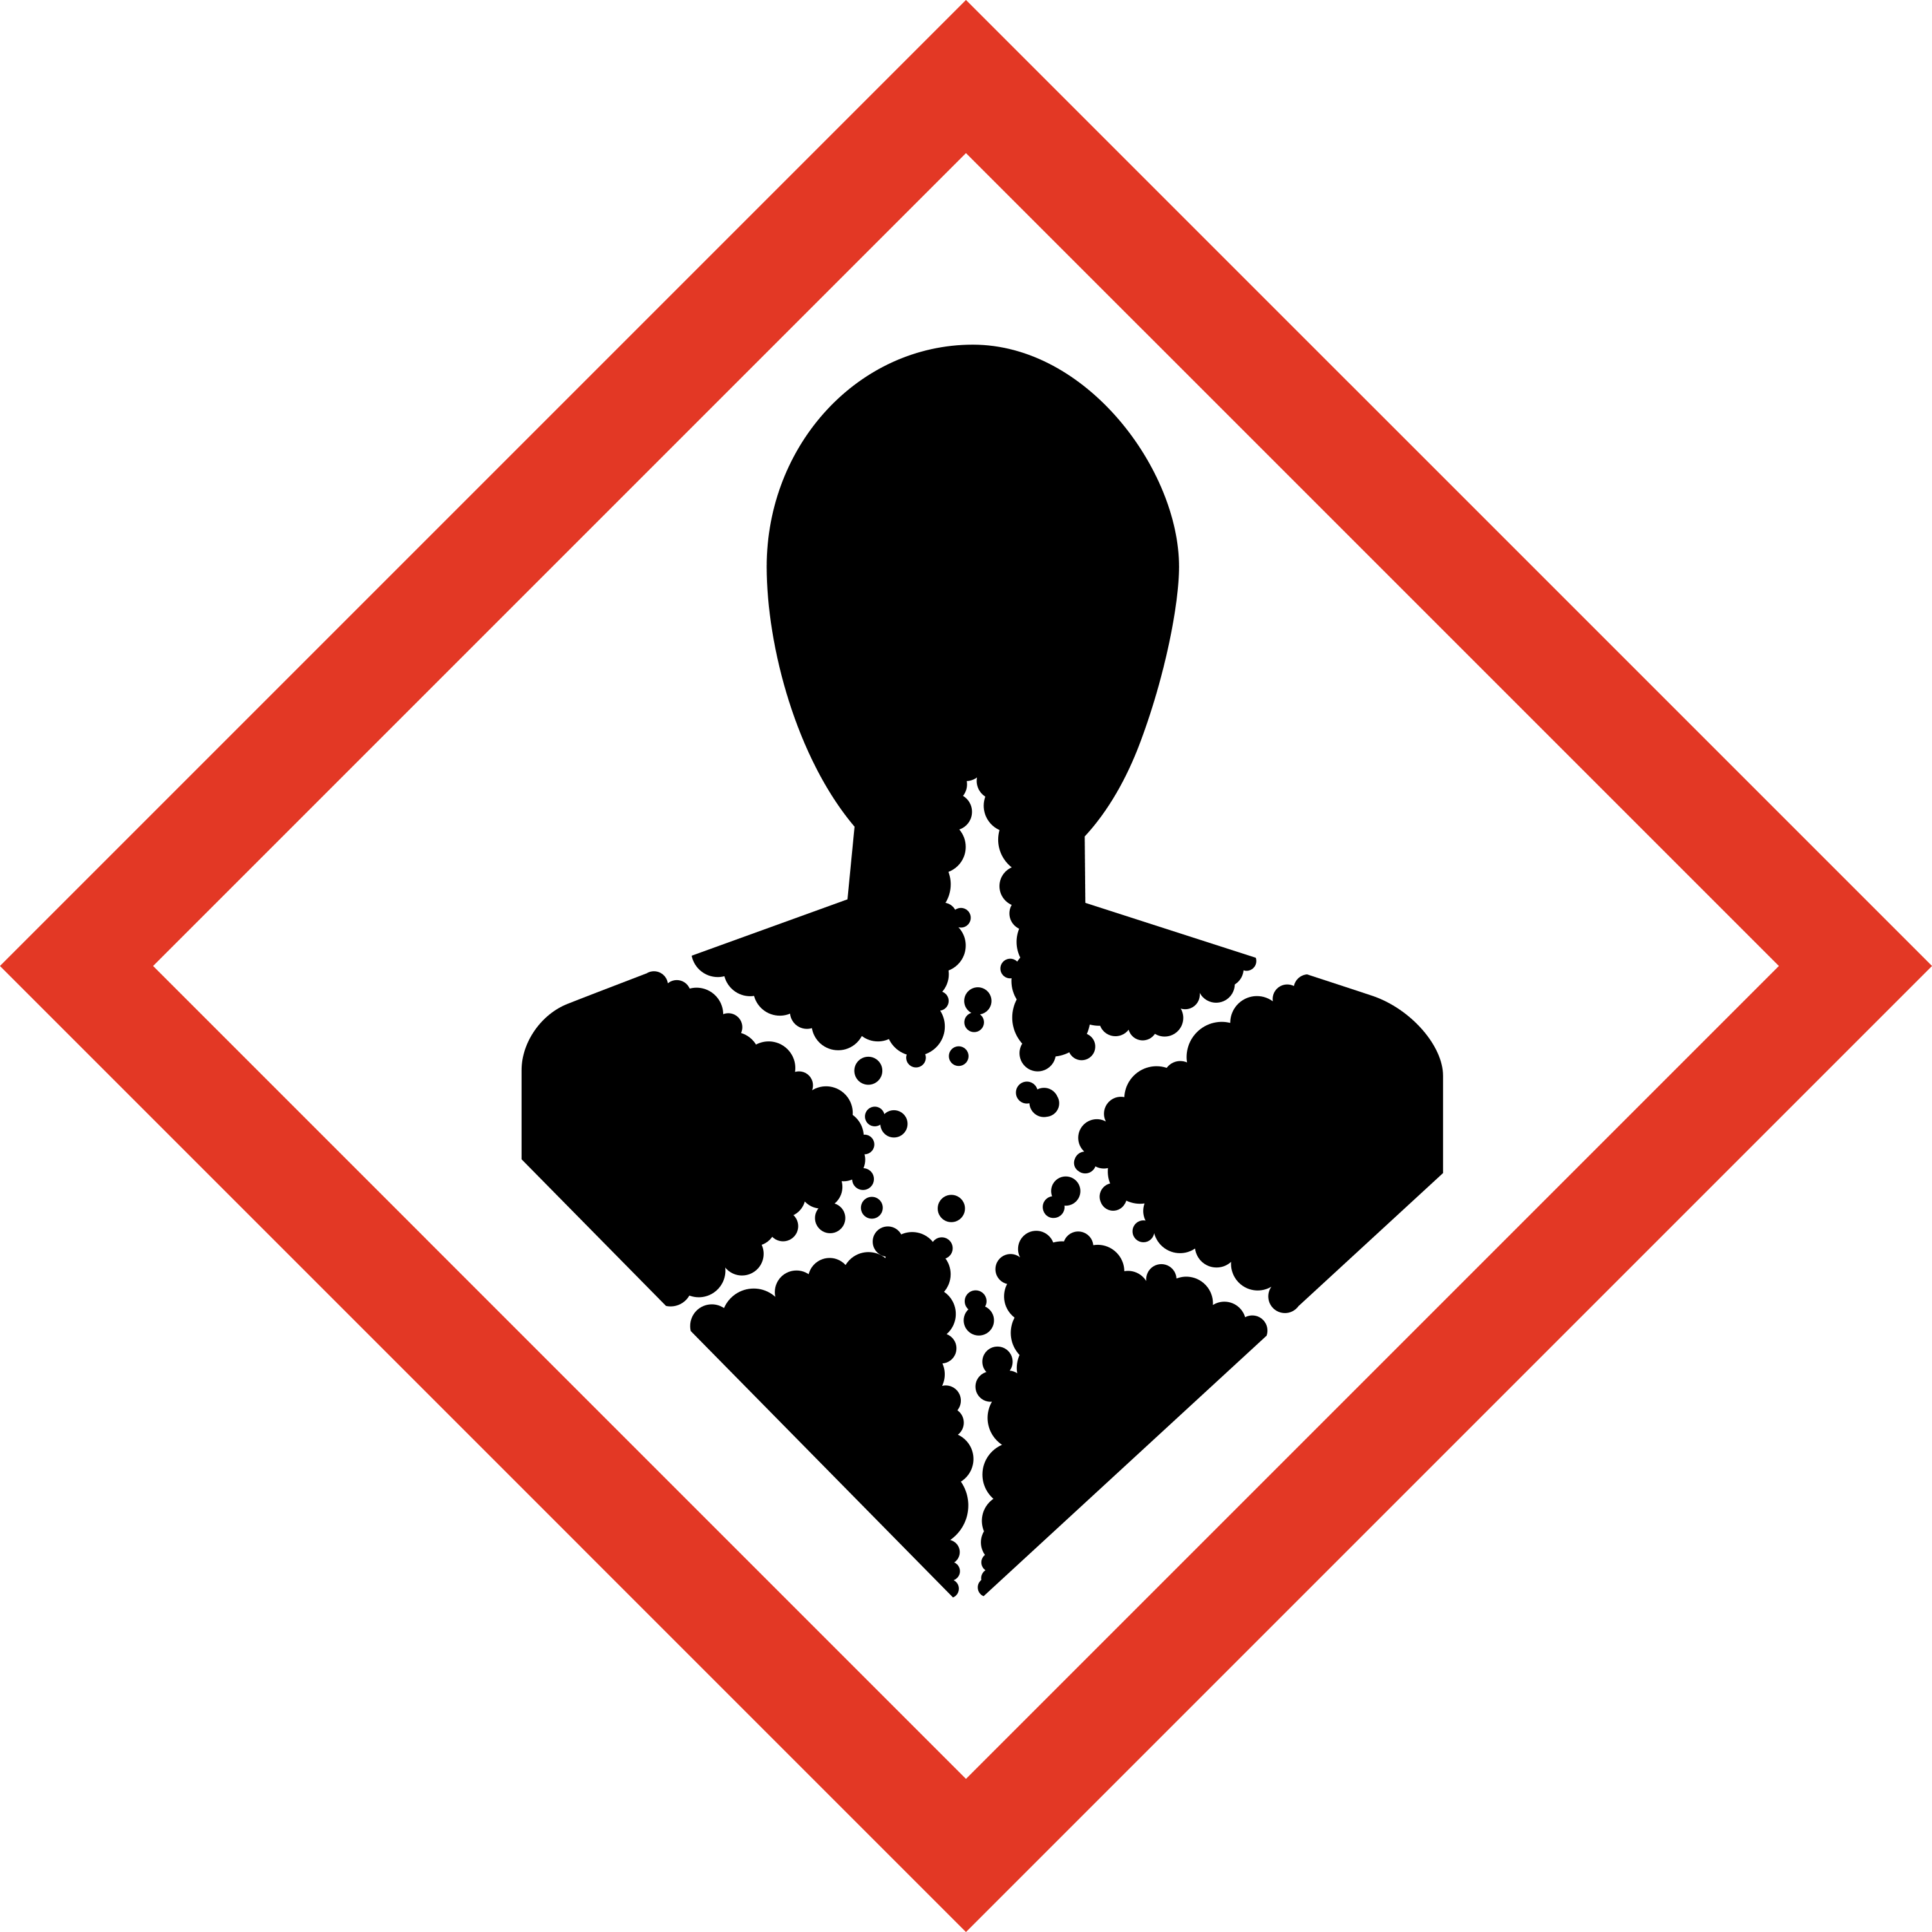 Danger pictogram, Mutagenic, carcinogenic, reprotoxic or toxic for certain organs substances